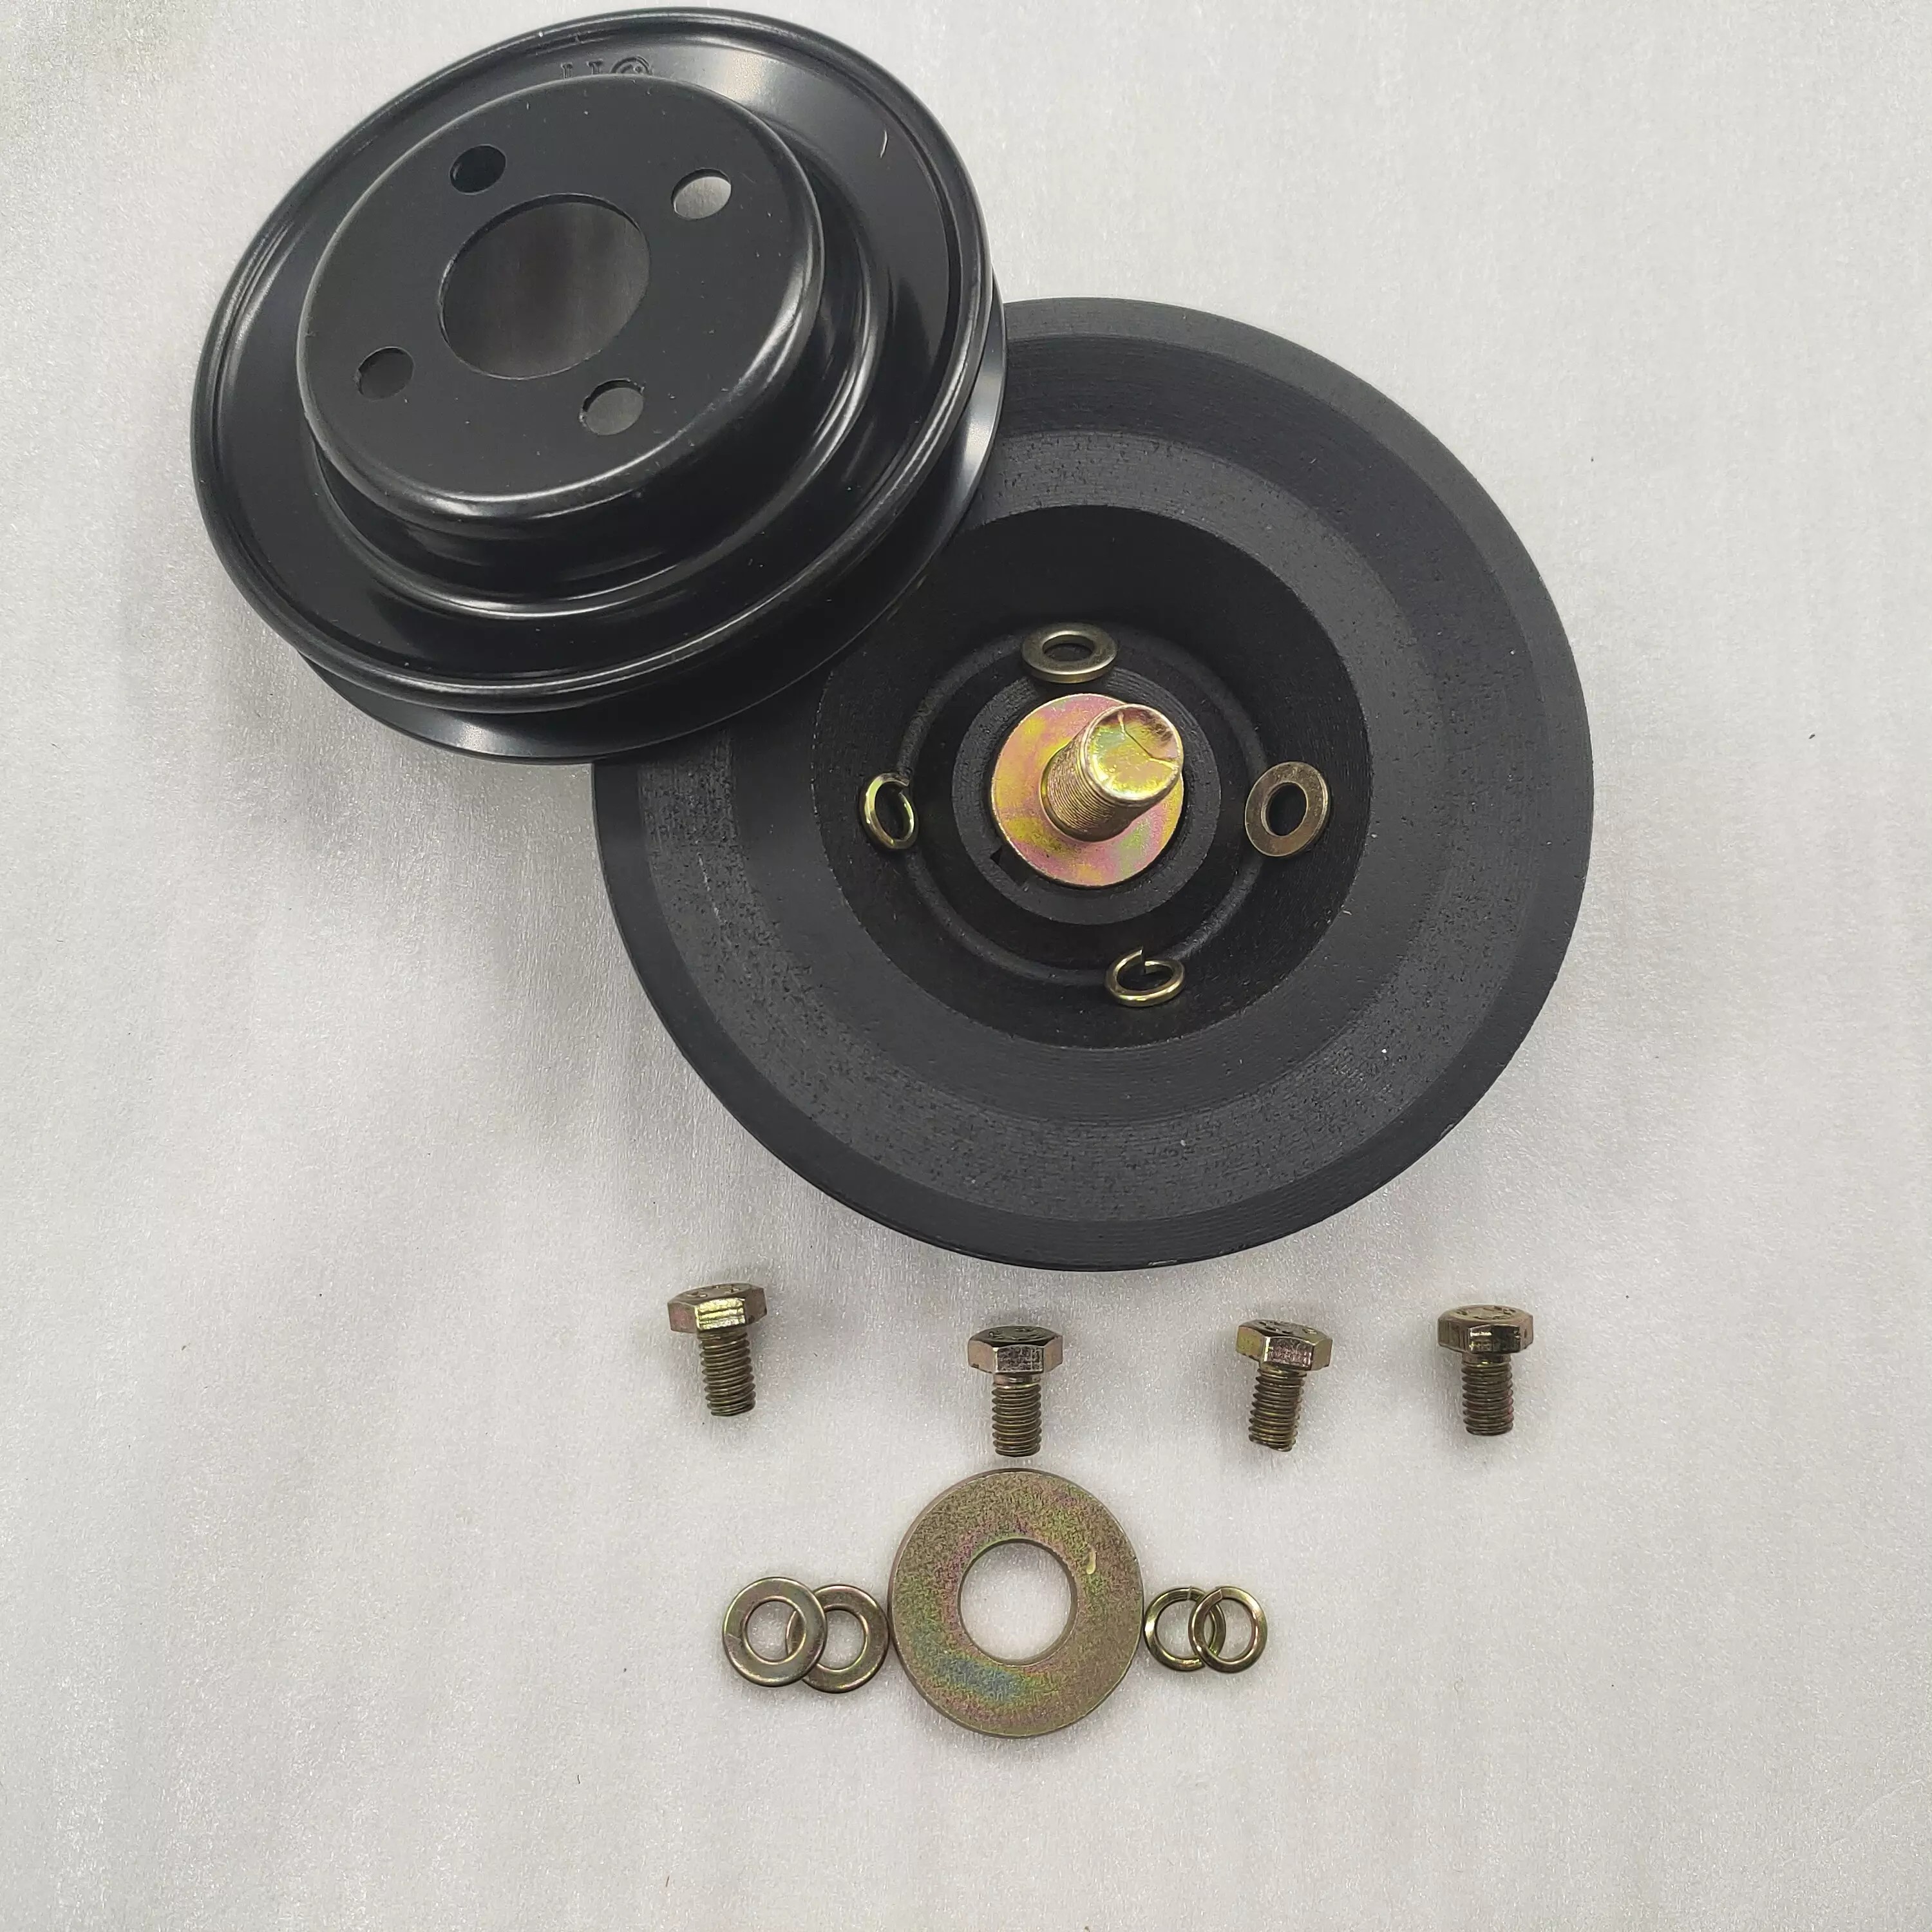 Newest Dayang Tricycle Three Wheel Truck 800cc Water-cooled Engine Parts Spare Part Pulley